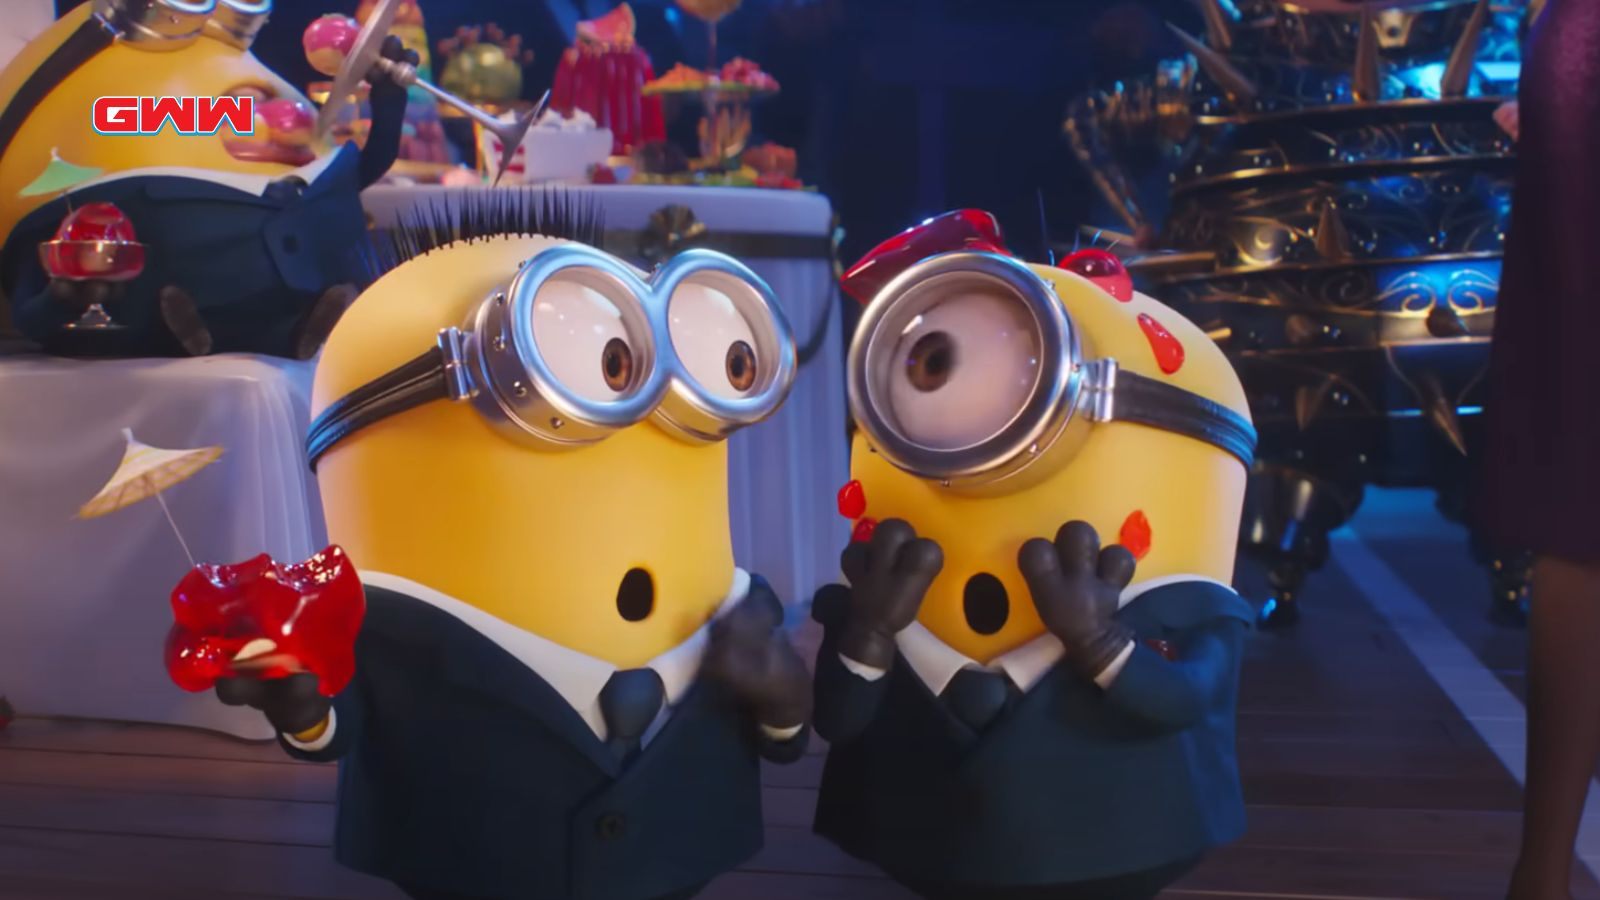 two minions dressed in suits and ties stand next to each other